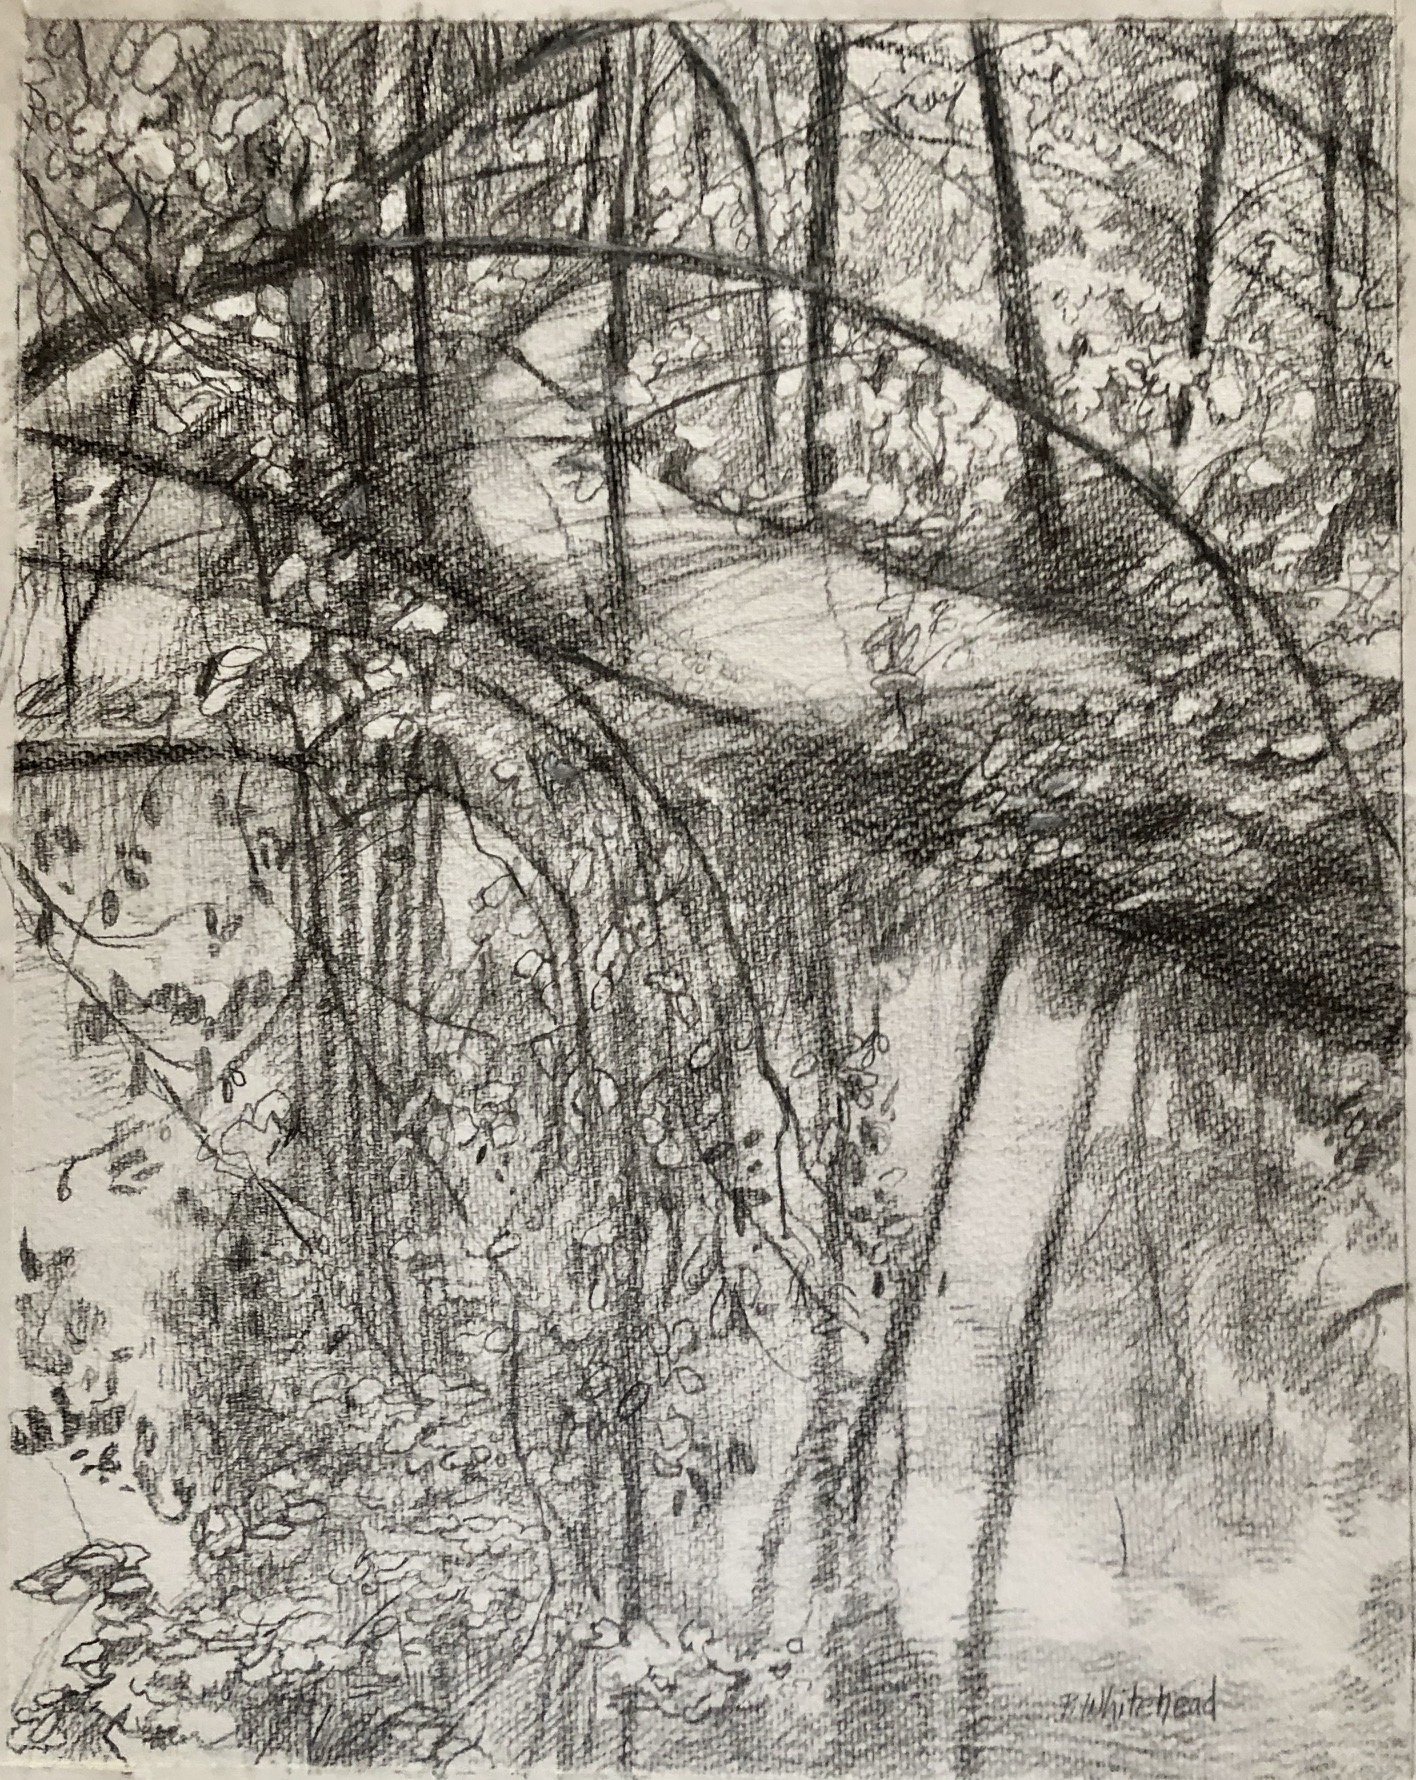 Towpath on the C&O - Crescent, 11x14". graphite, charcoal, conte (sold)